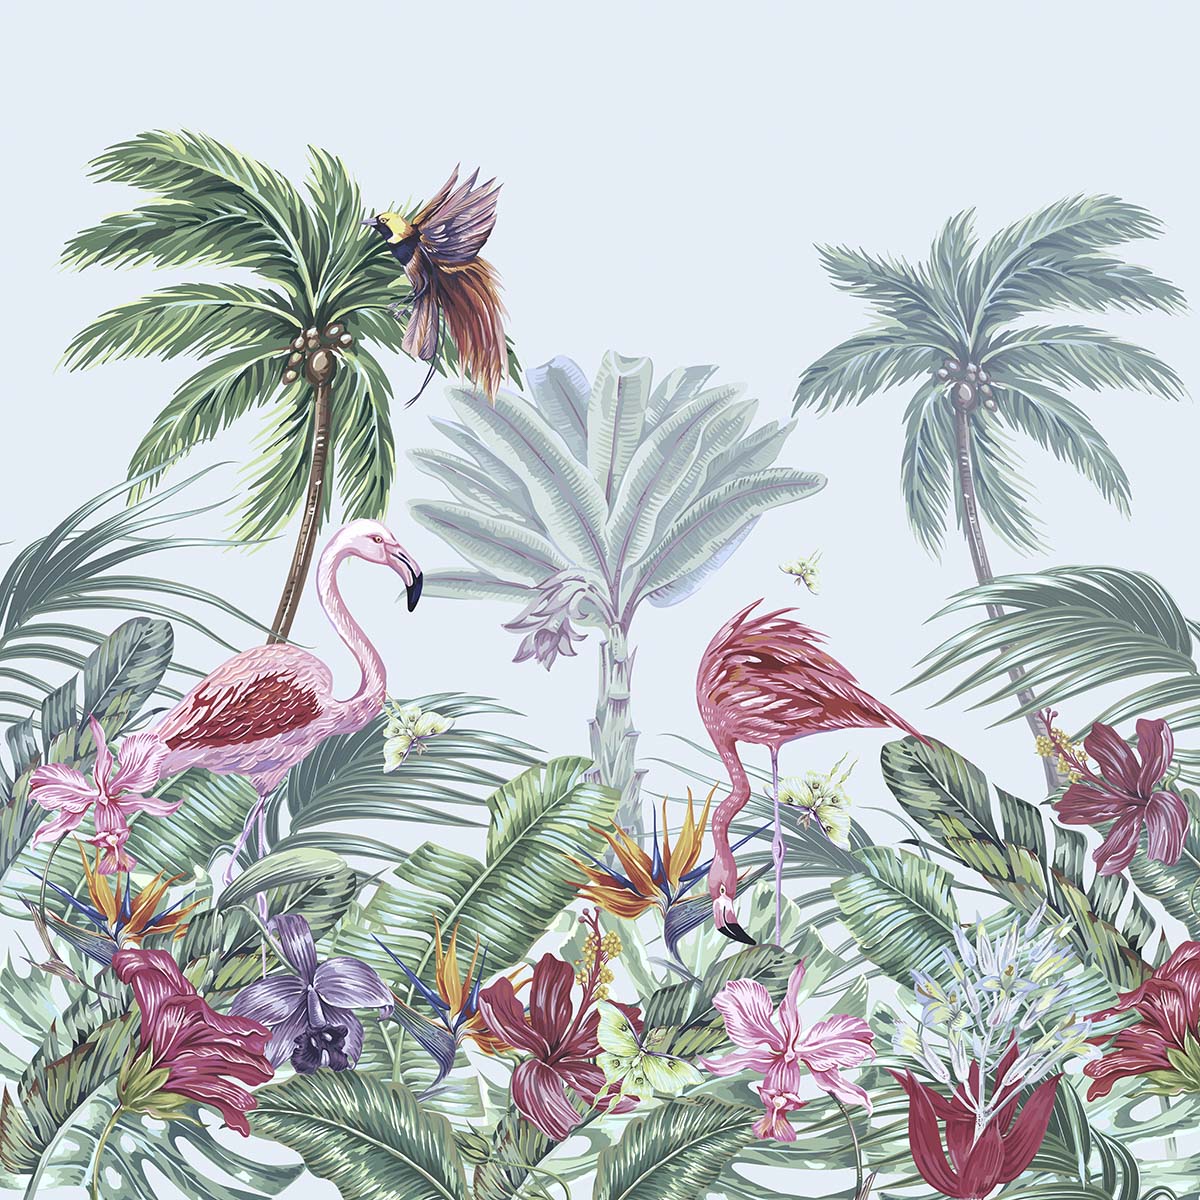 A flamingos and palm trees